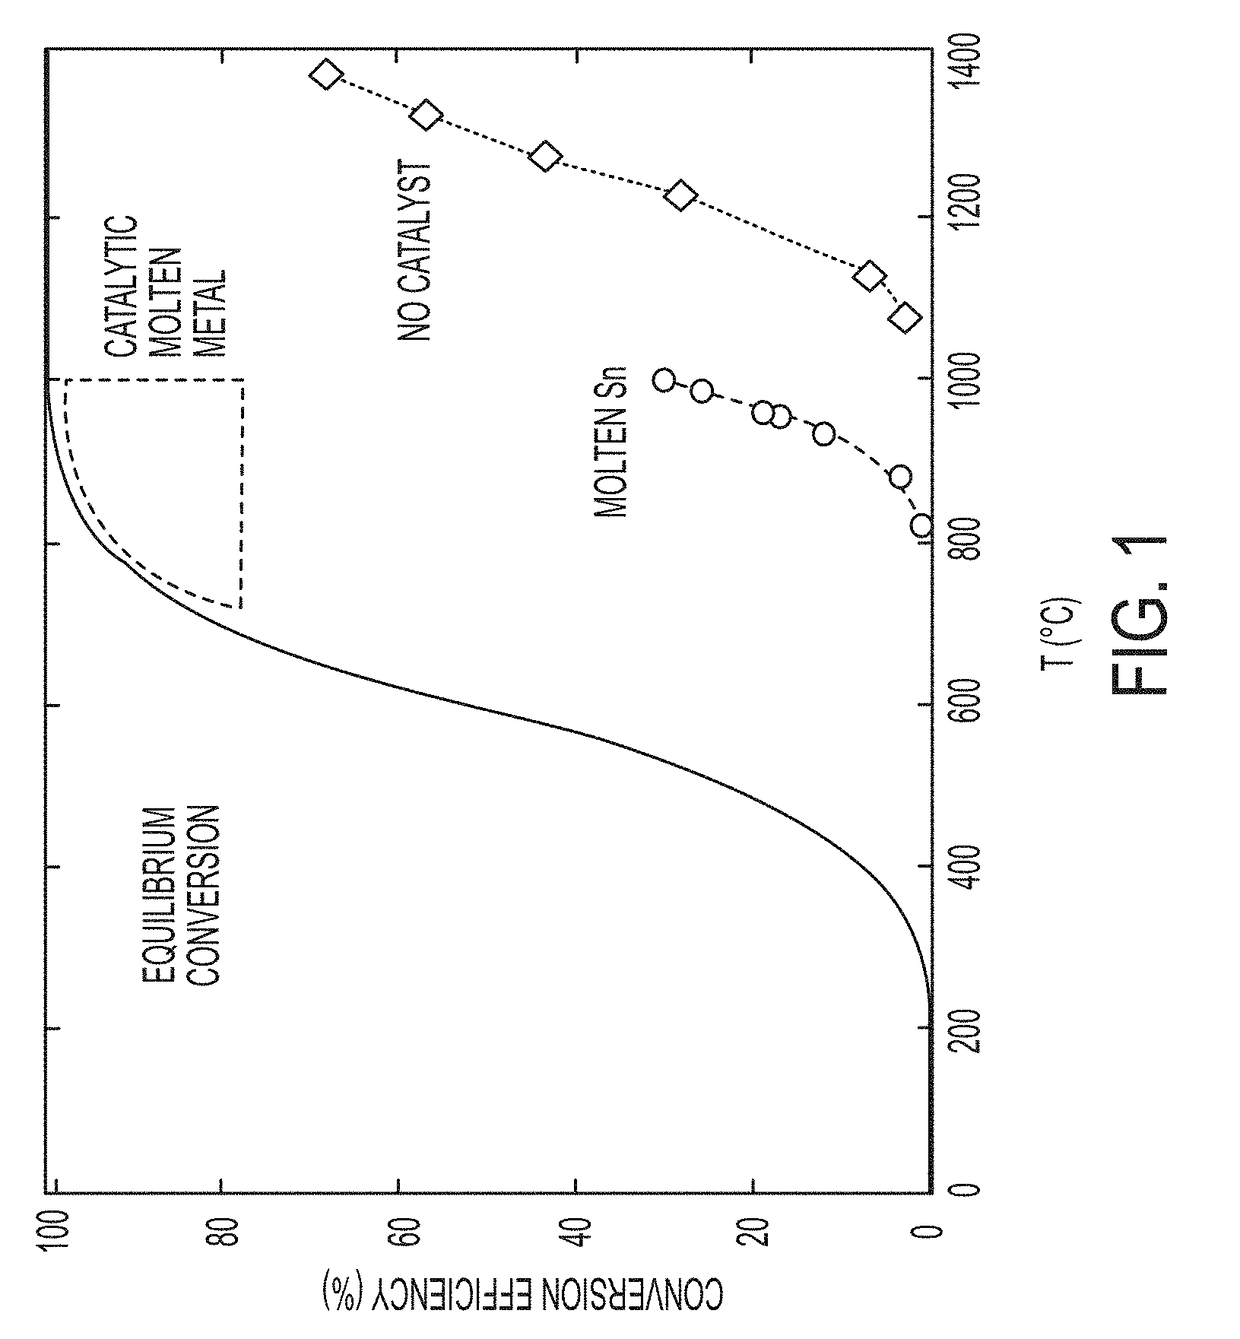 System and method for pyrolysis using a liquid metal catalyst